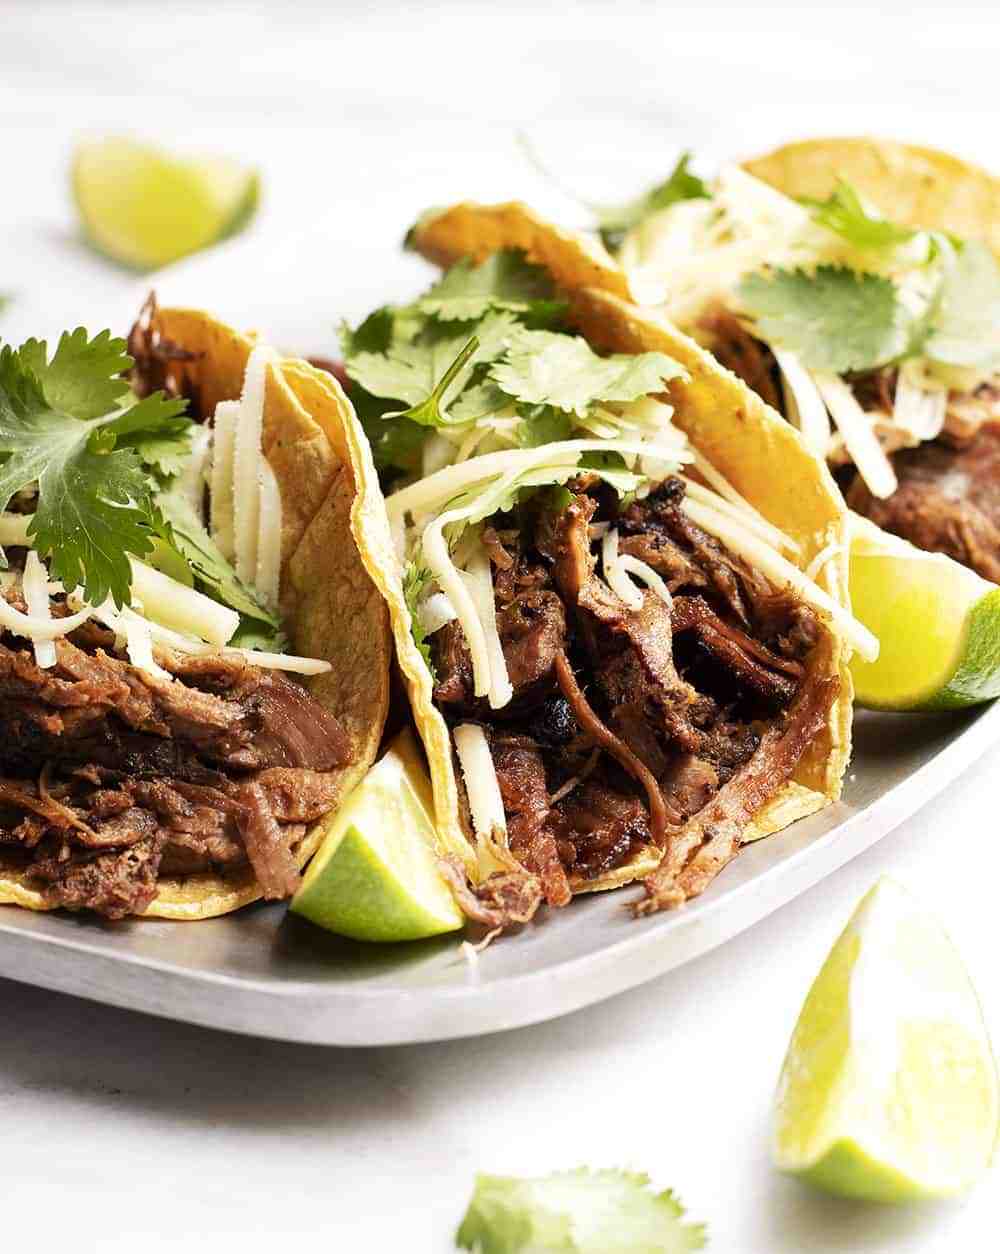 What is carnitas Spanish for?